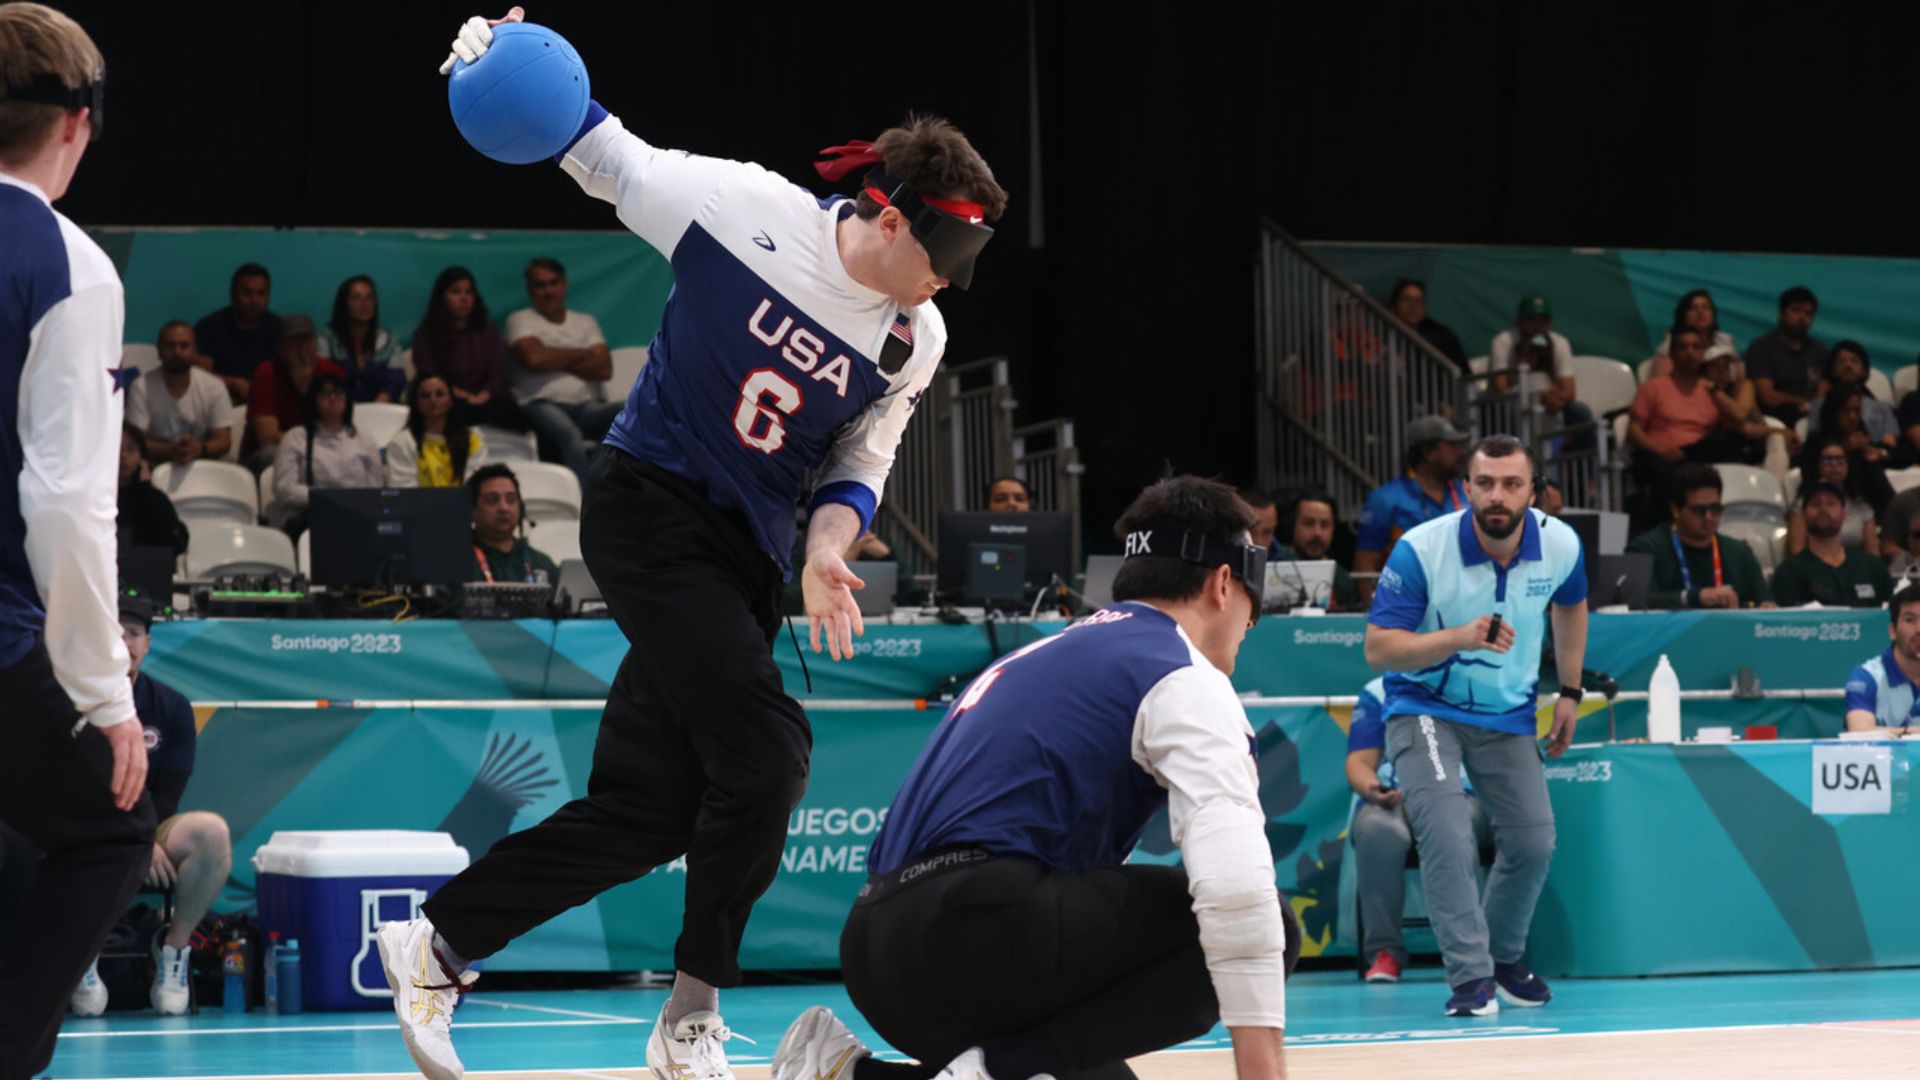 United States Advances to Goalball Semifinals with a Victory over Venezuela